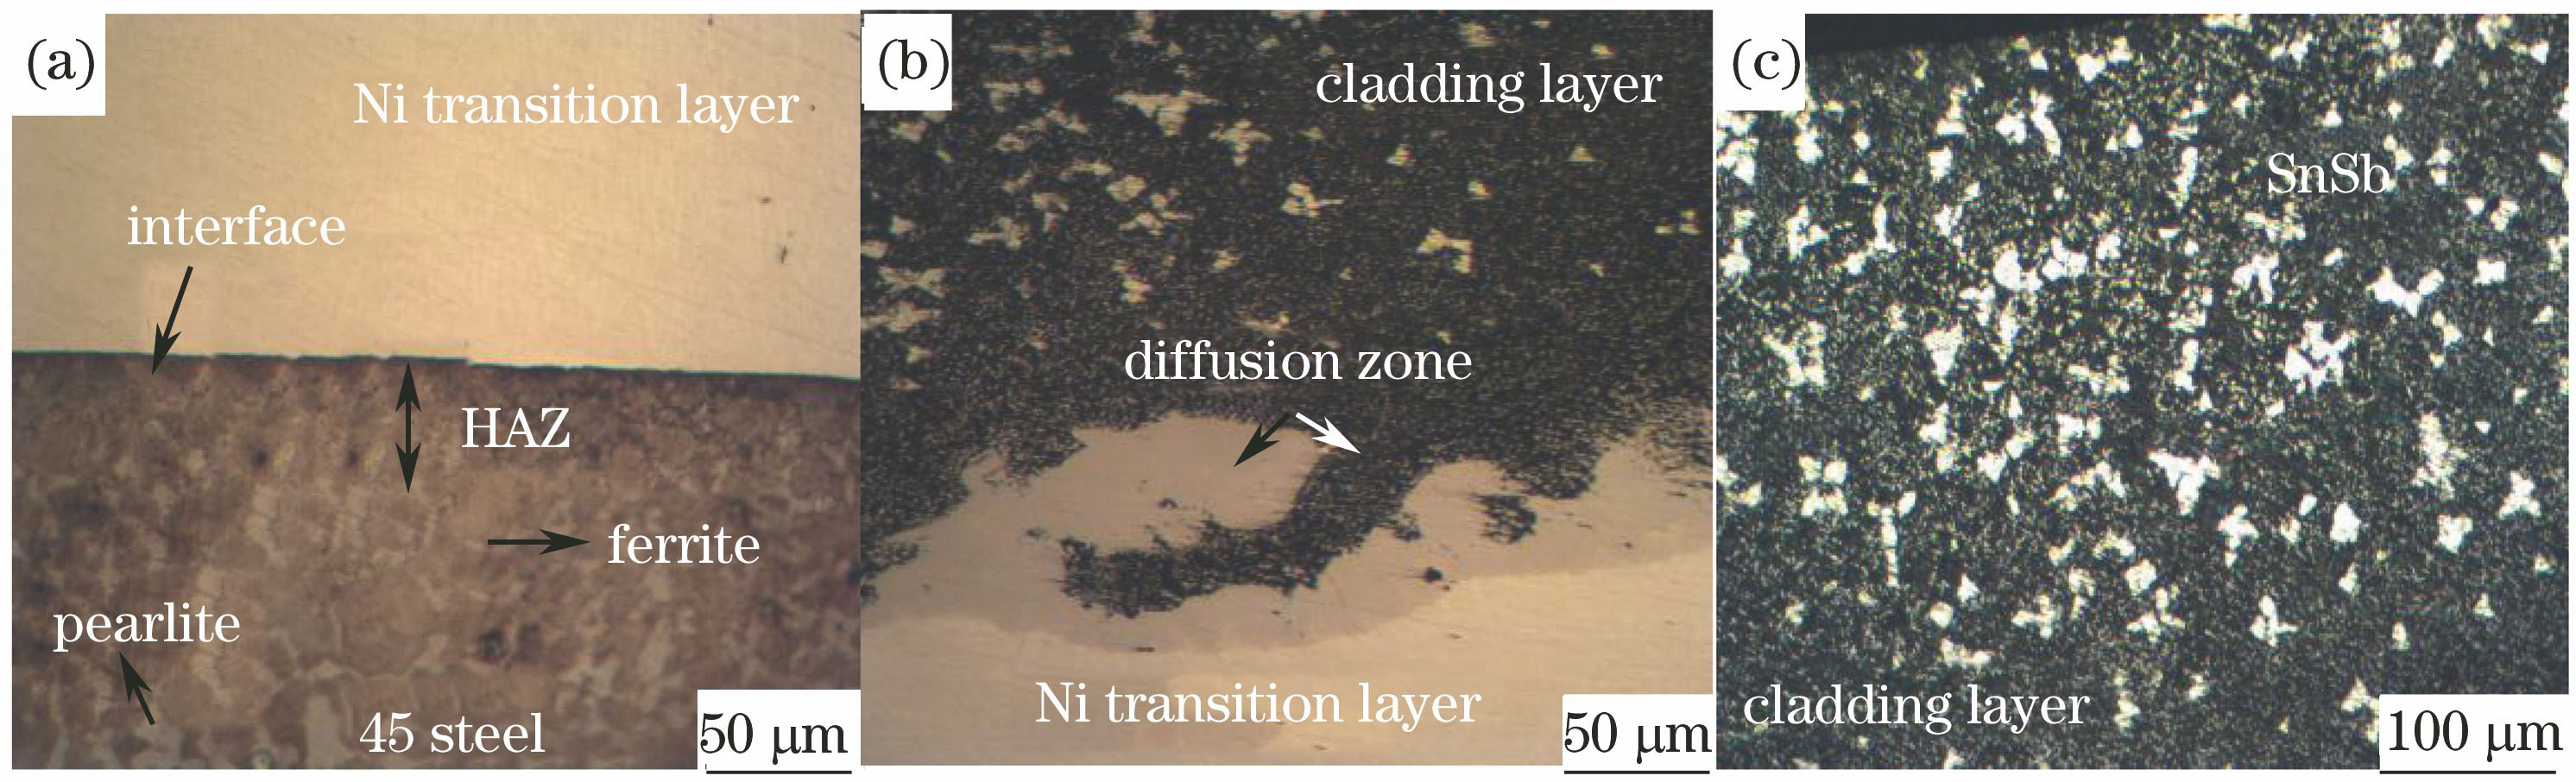 Microstructures and morphologies of laser cladding nickel/tin-based Babbitt alloy in different positions. (a) Bonding zone between substrate and transition layer; (b) diffusion zone between transition layer and cladding layer; (c) cladding layer of nickel/tin-based Babbitt alloy